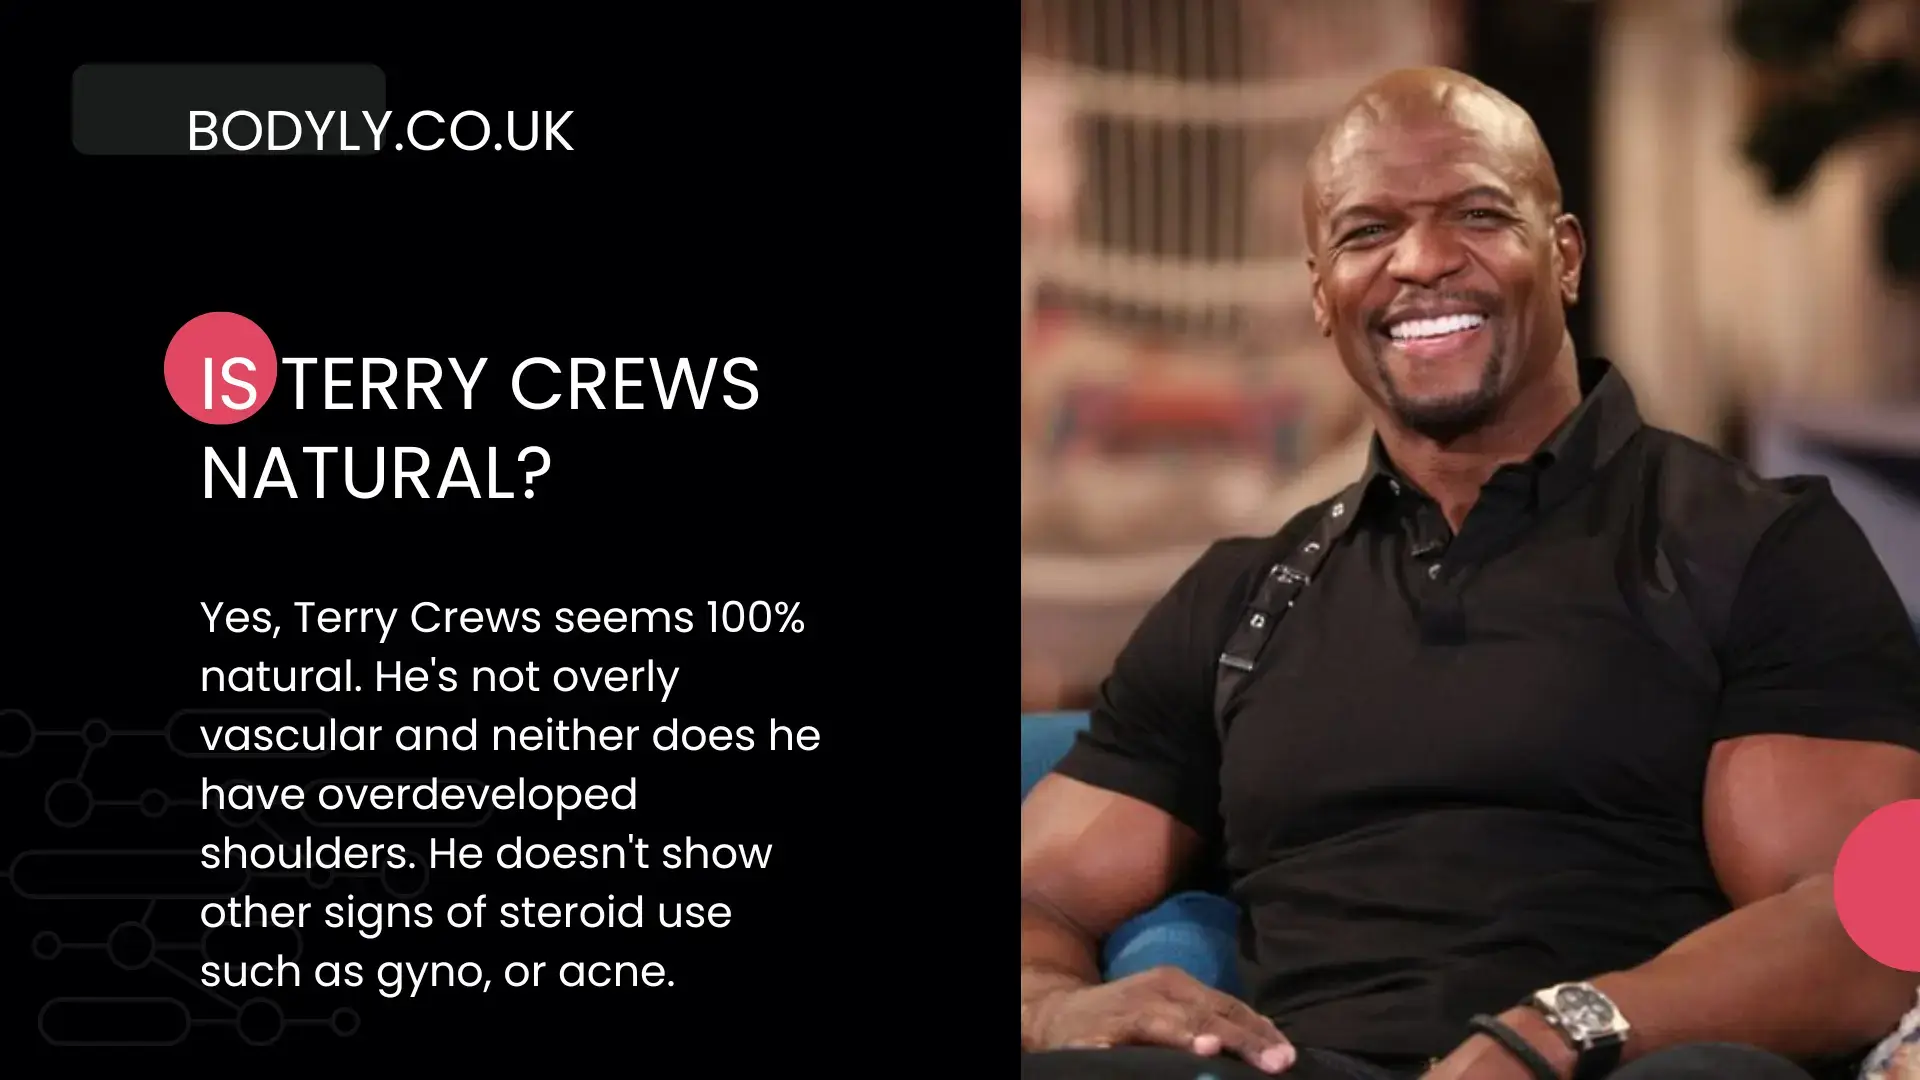 is terry crews natural or on steroids